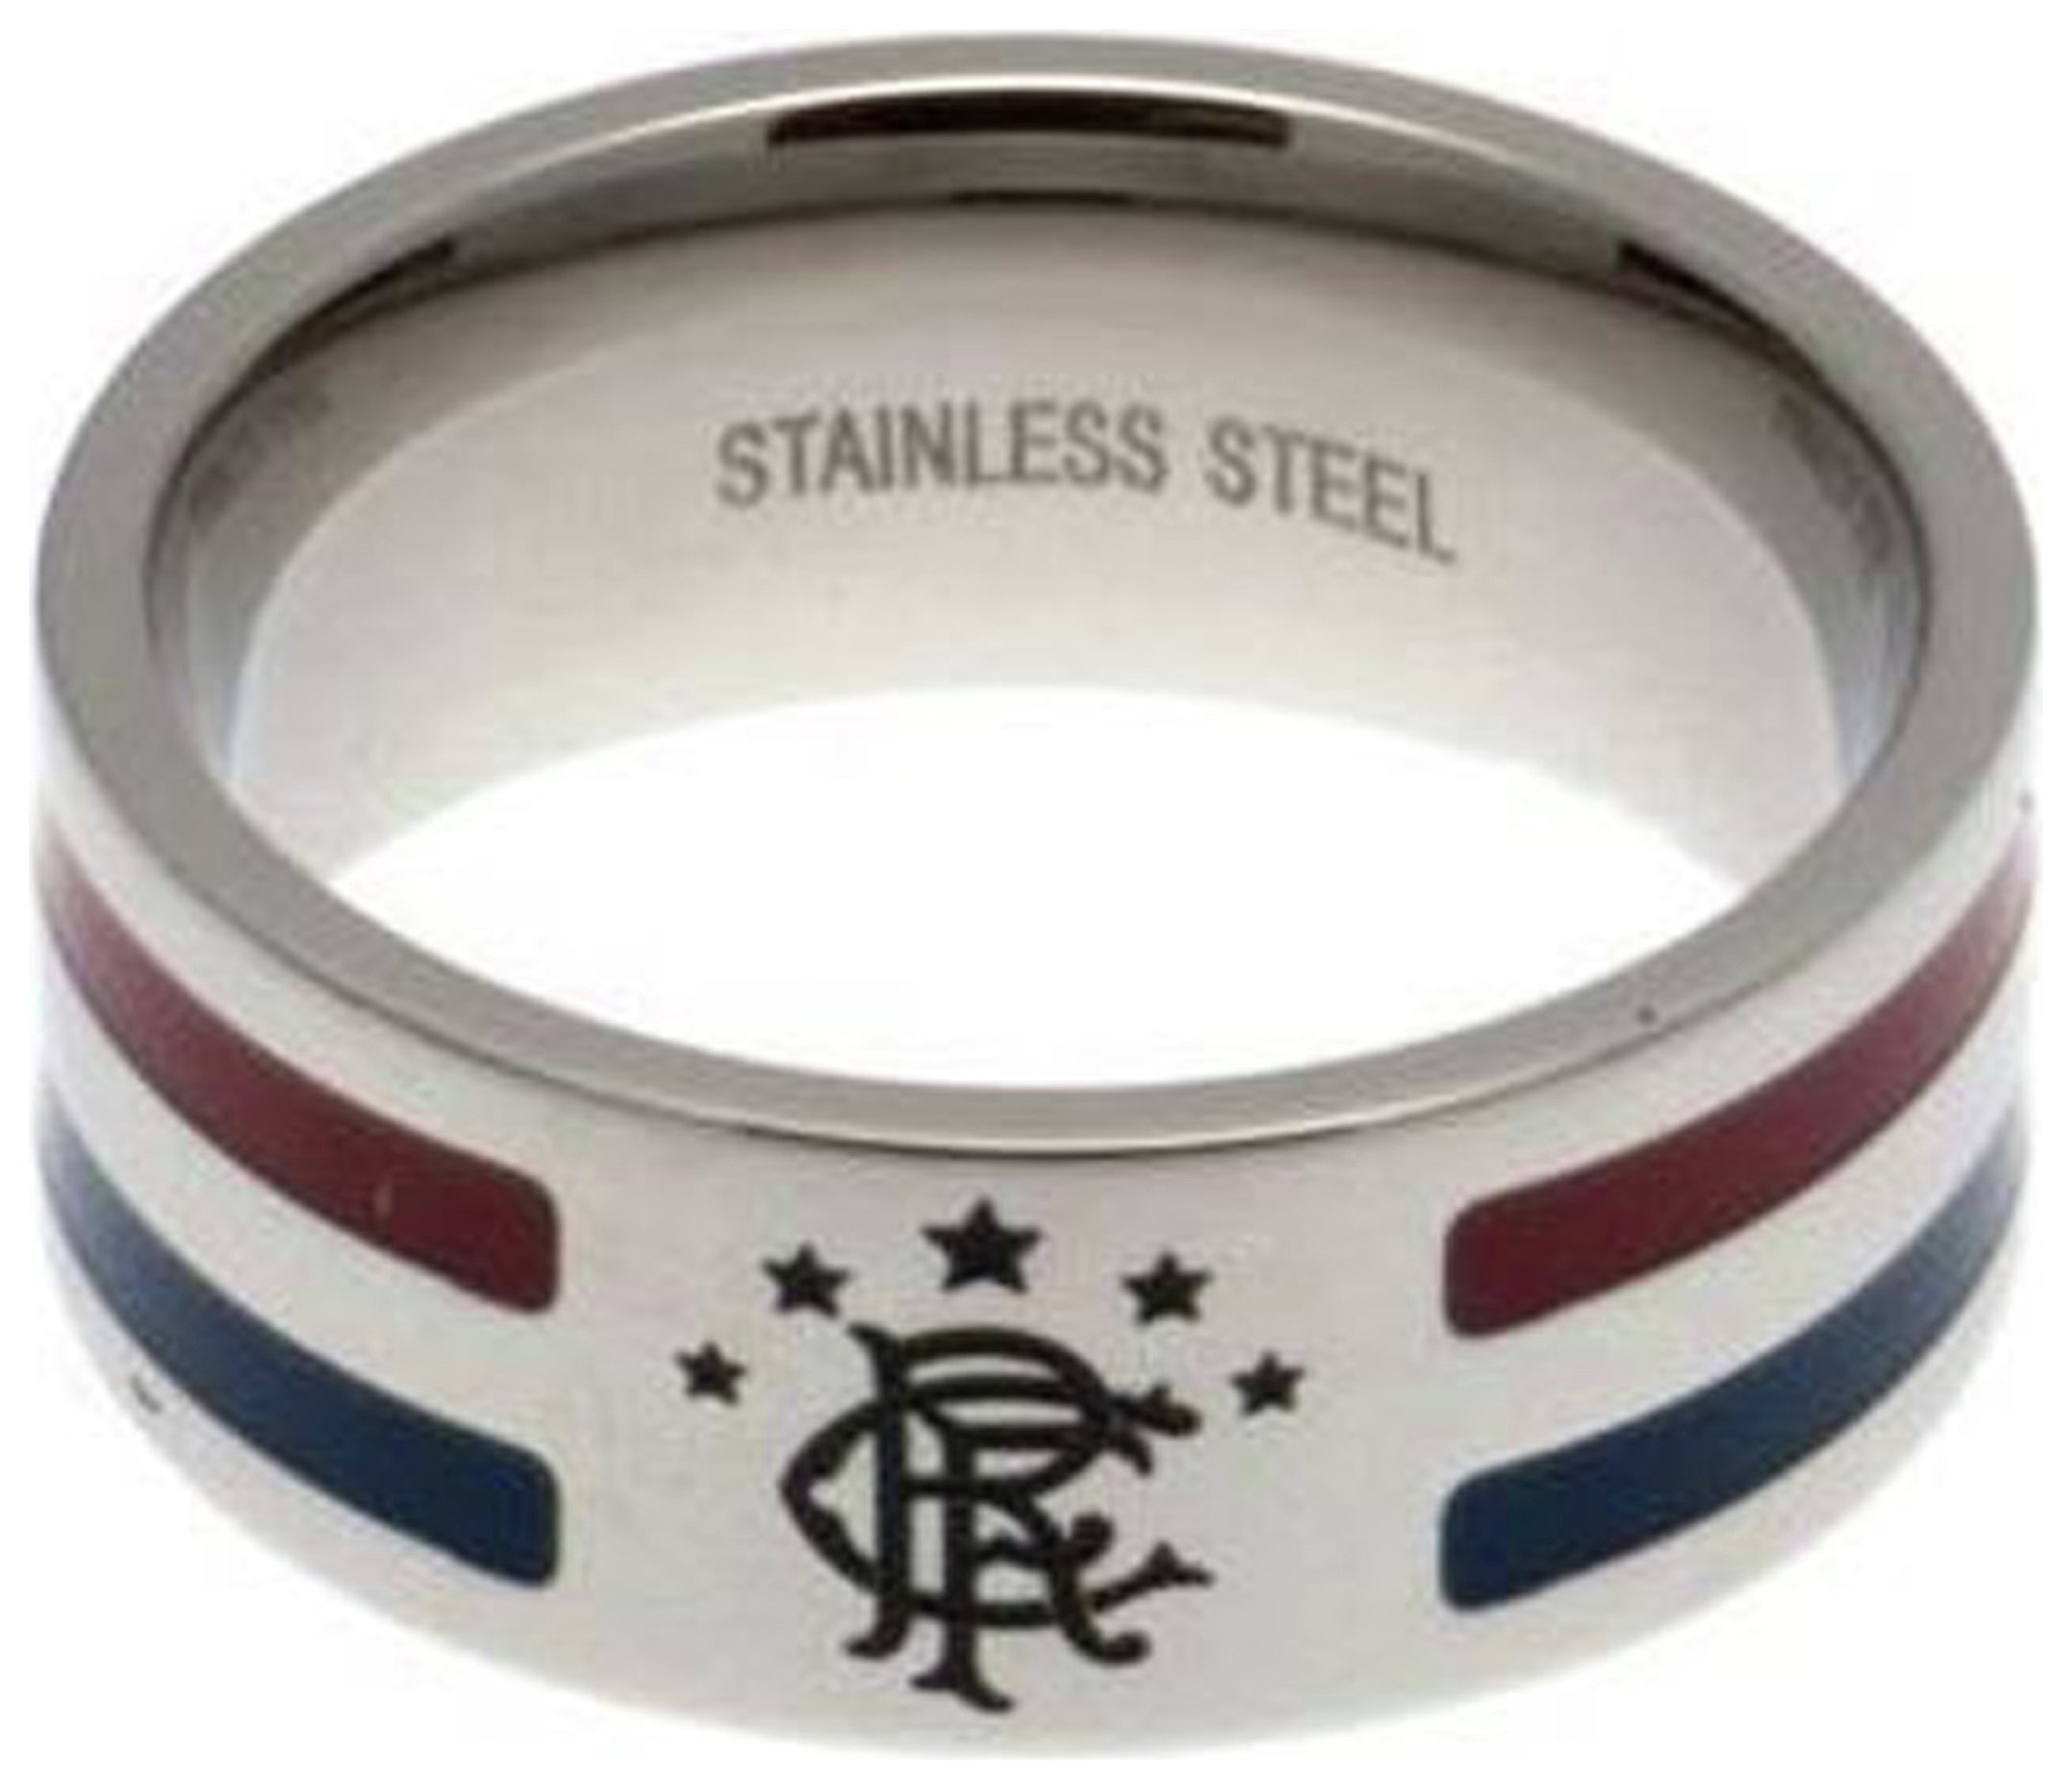 Stainless Steel Rangers Striped Ring - Size X